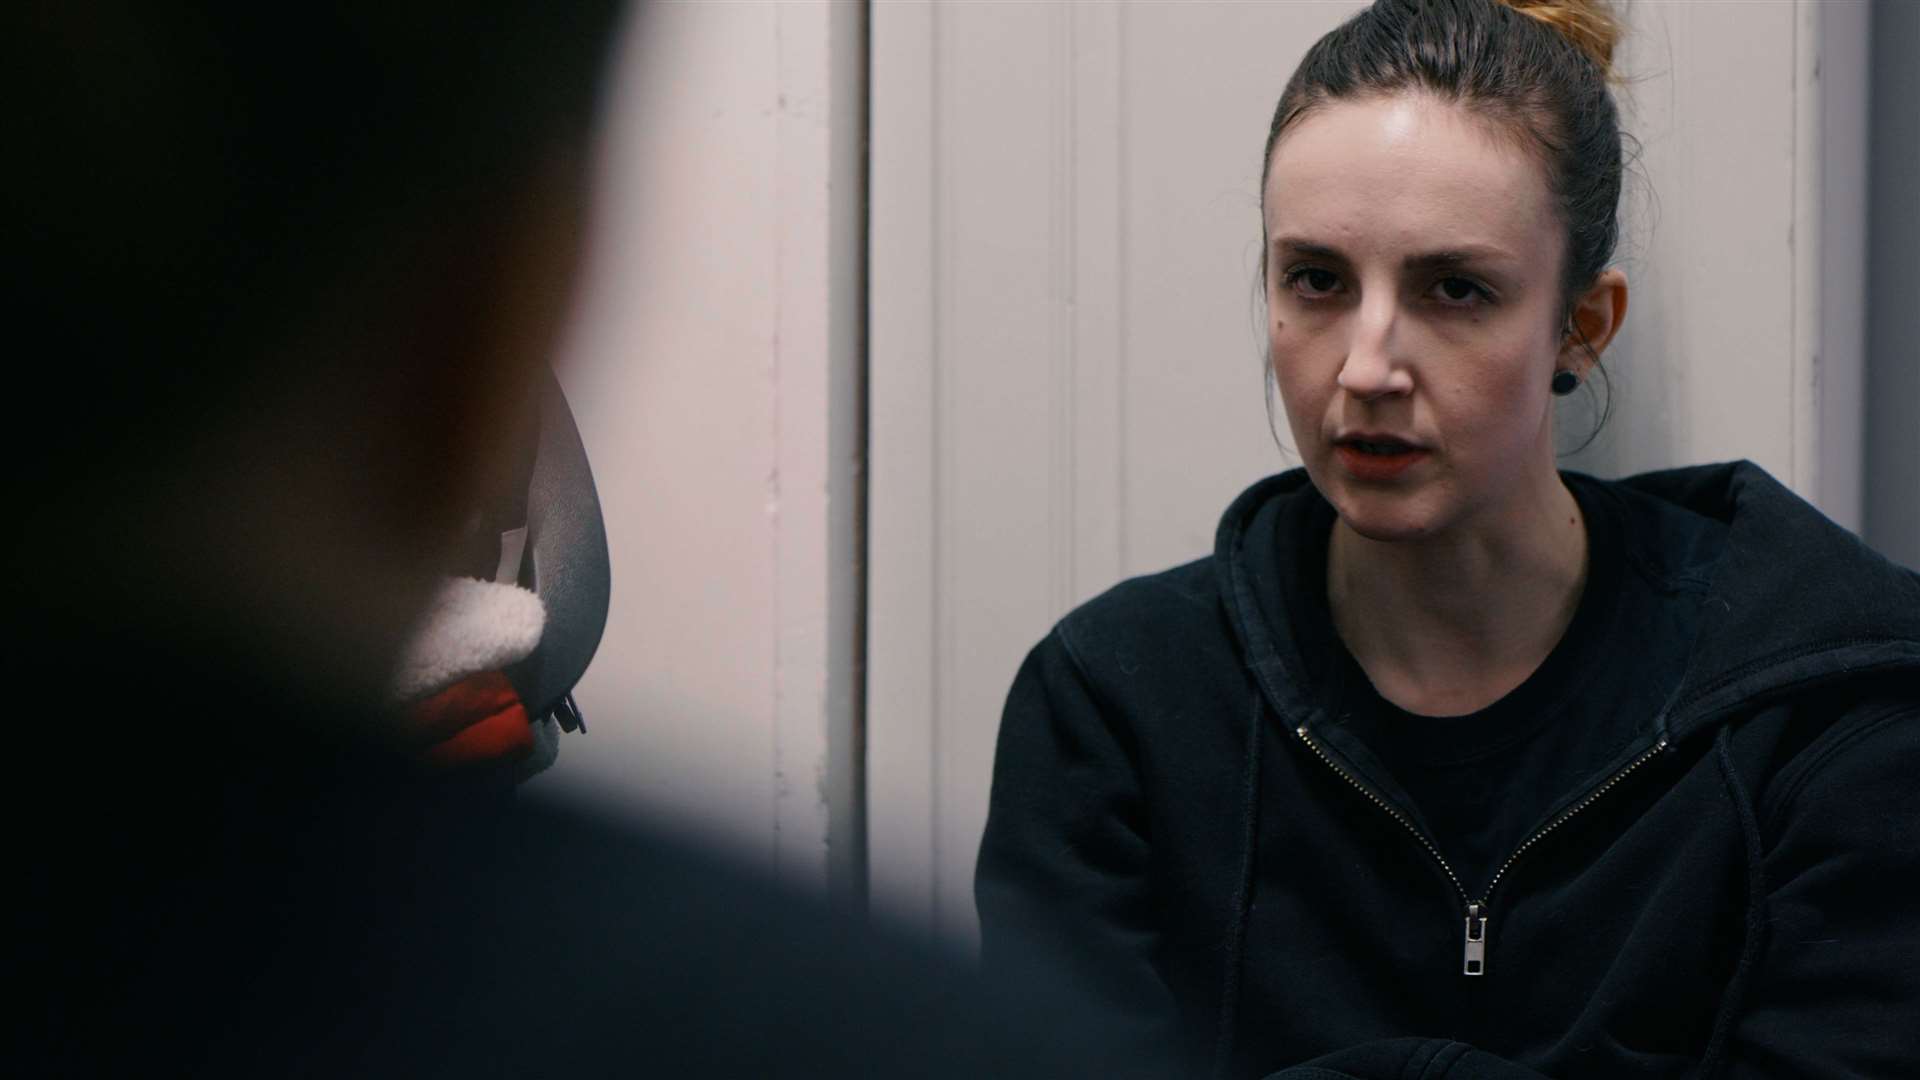 Stacey Pomeroy as Juno in the thriller Killahurtz made in Sittingbourne, Sheppey and Medway. Picture: Nightpiece Films